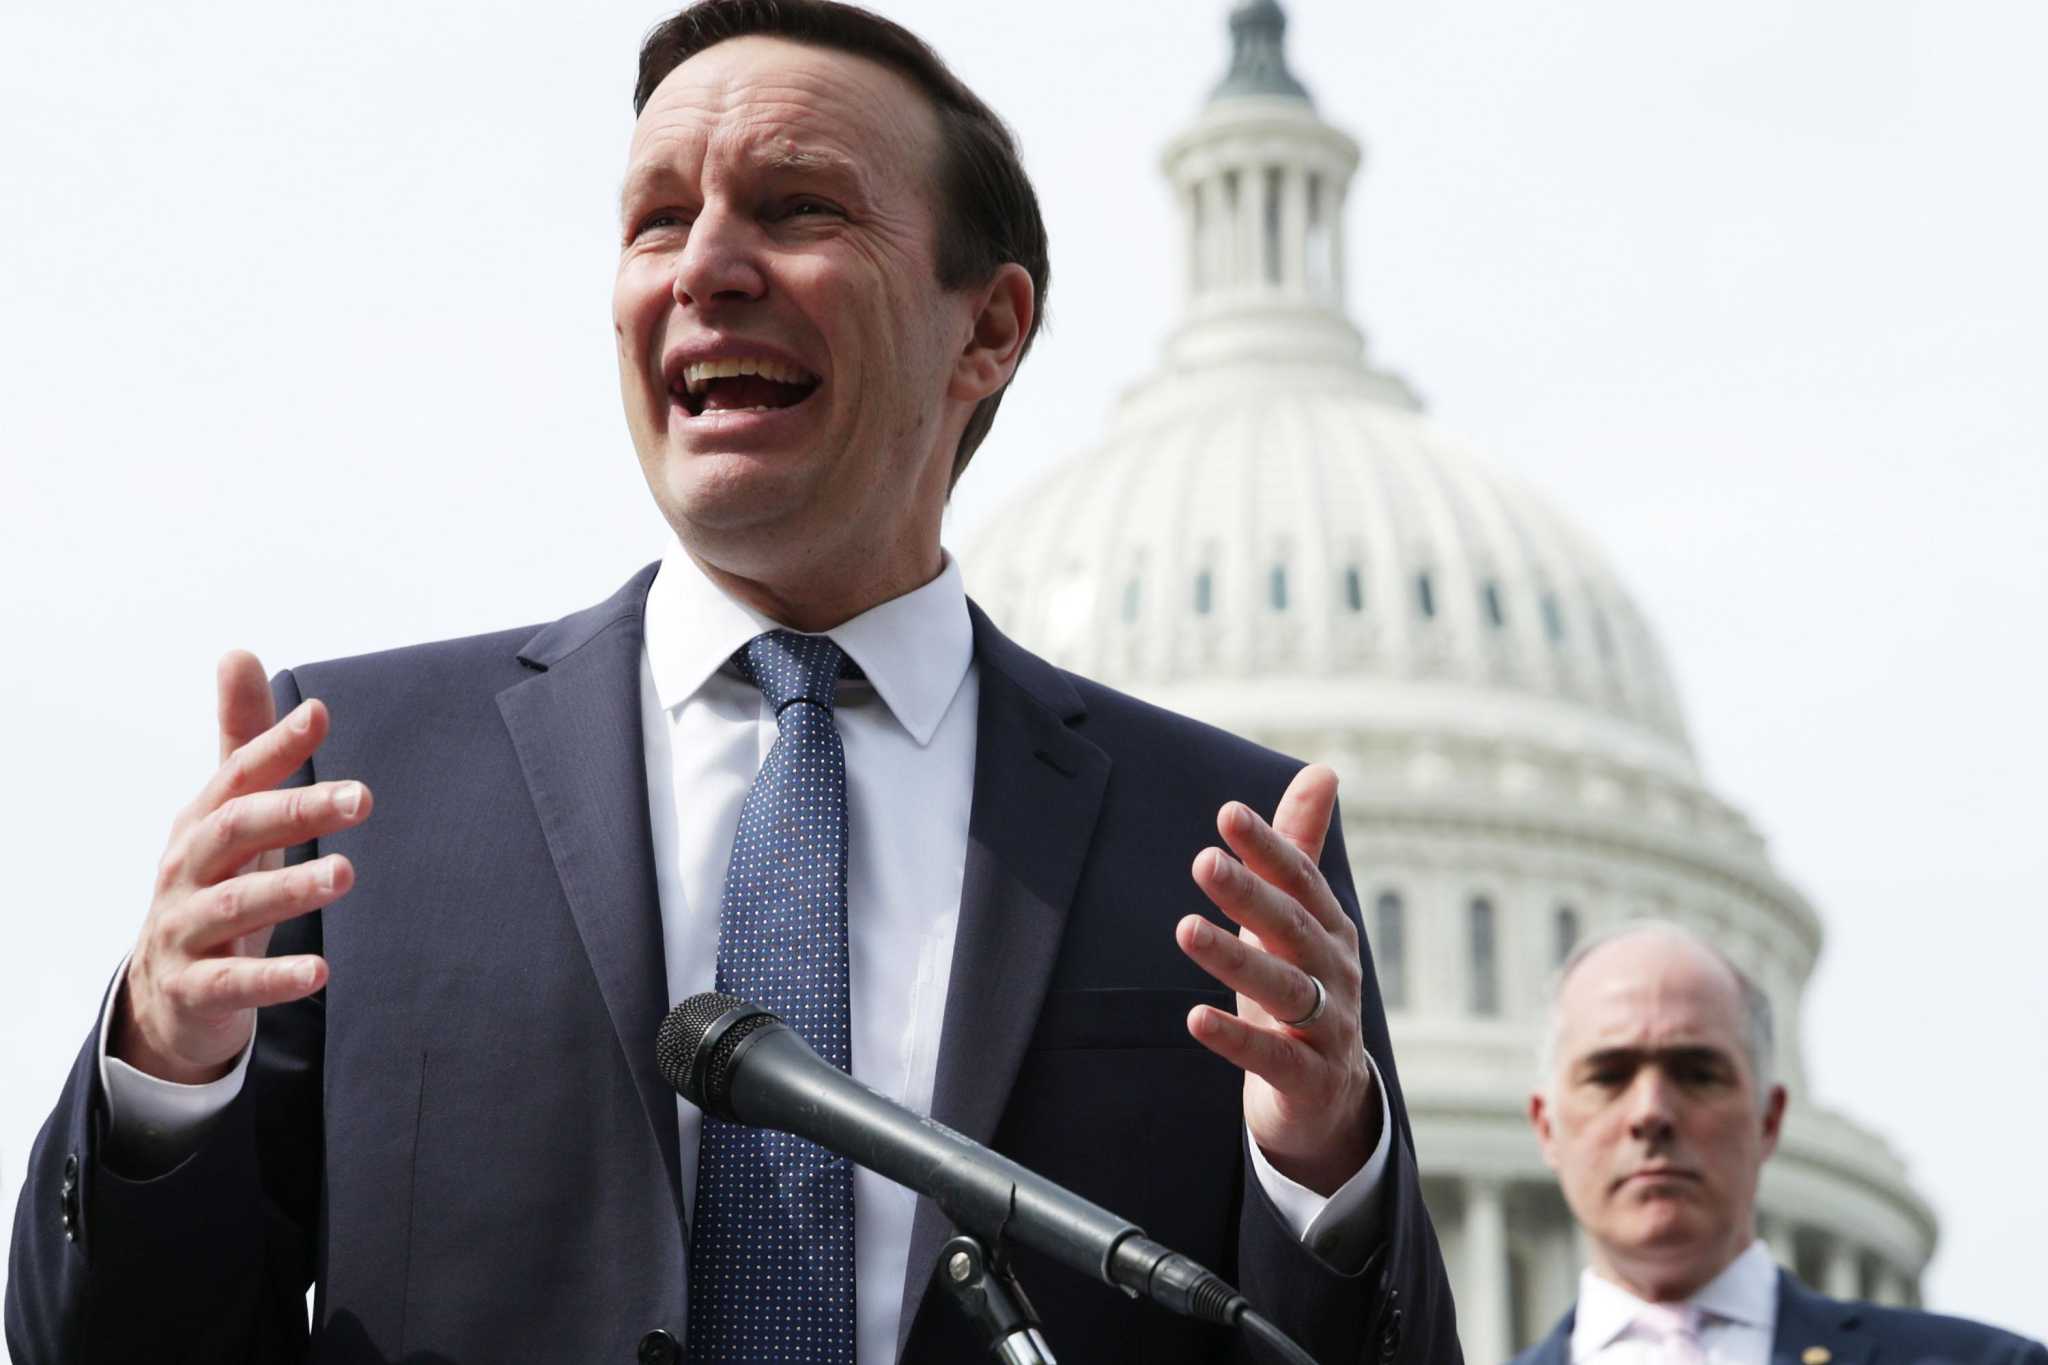 Chris Murphy and his family are house-hunting in the Hartford area